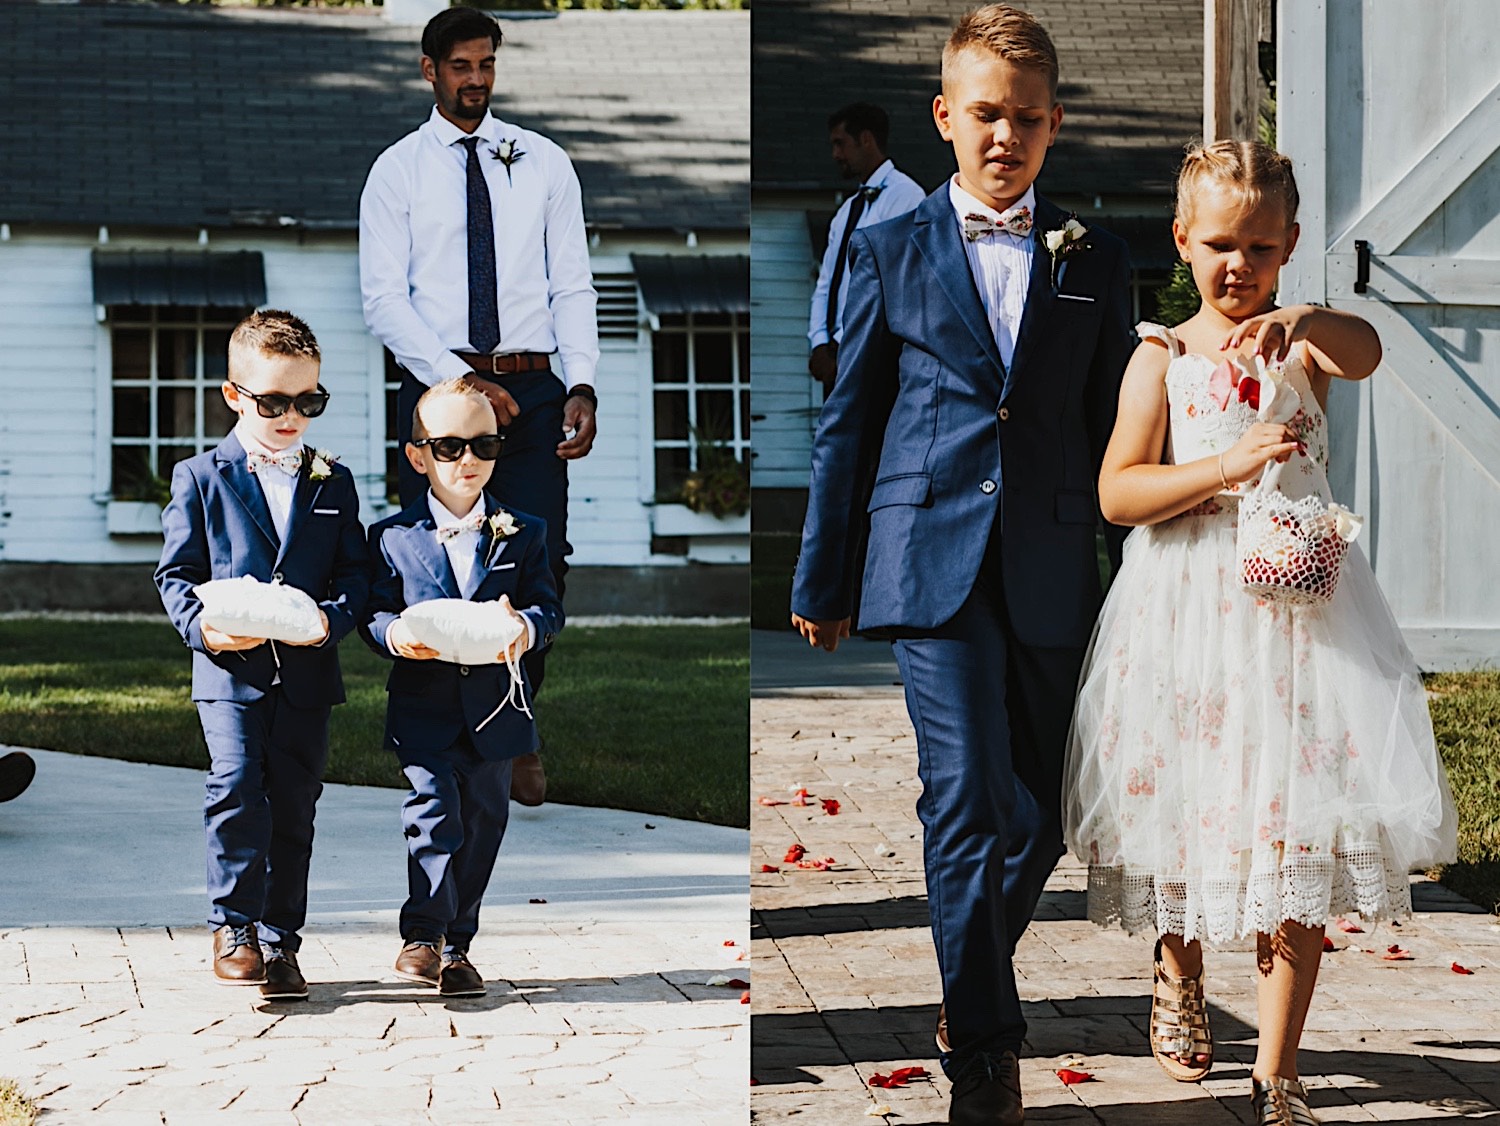 2 photos side by side, the left is of two young boys who are ring bearers walking down the aisle, the right is of the flower girl and a young boy walking down the aisle together